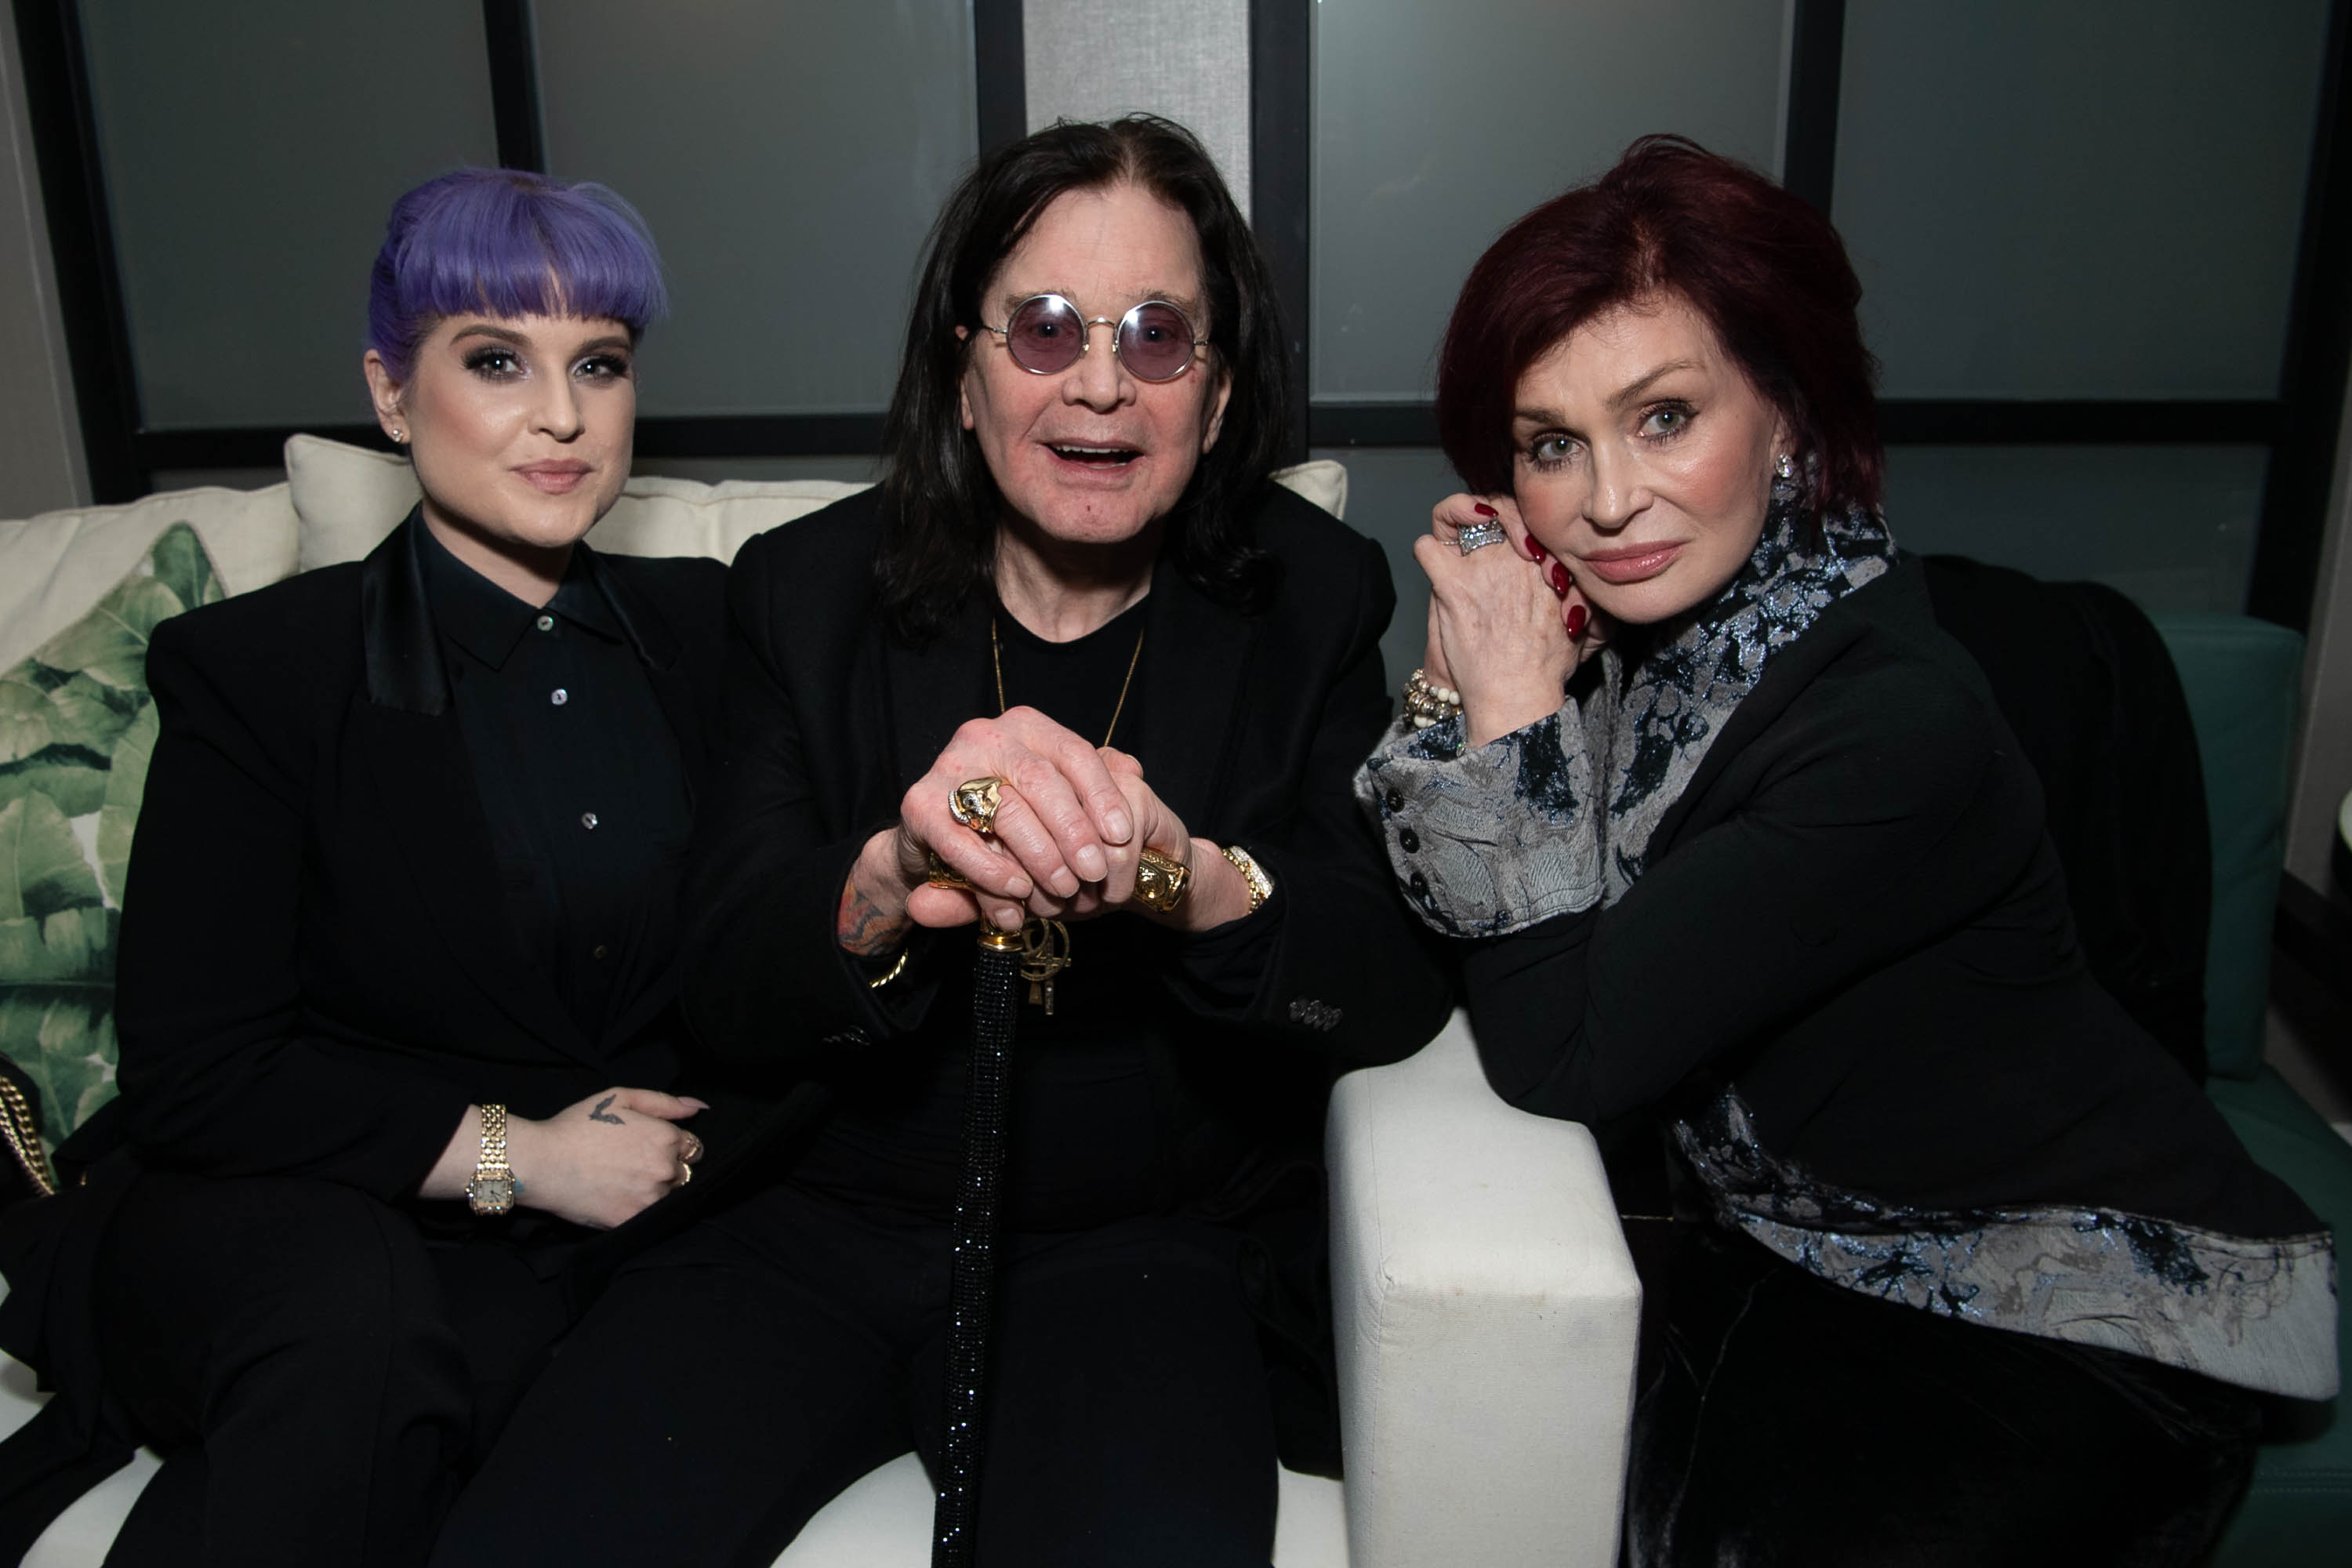 Kelly Osbourne, Ozzy Osbourne and Sharon Osbourne attend the after party for the screening of  "A Million Little Pieces" on December 04, 2019, in West Hollywood, California. | Source: Getty Images.